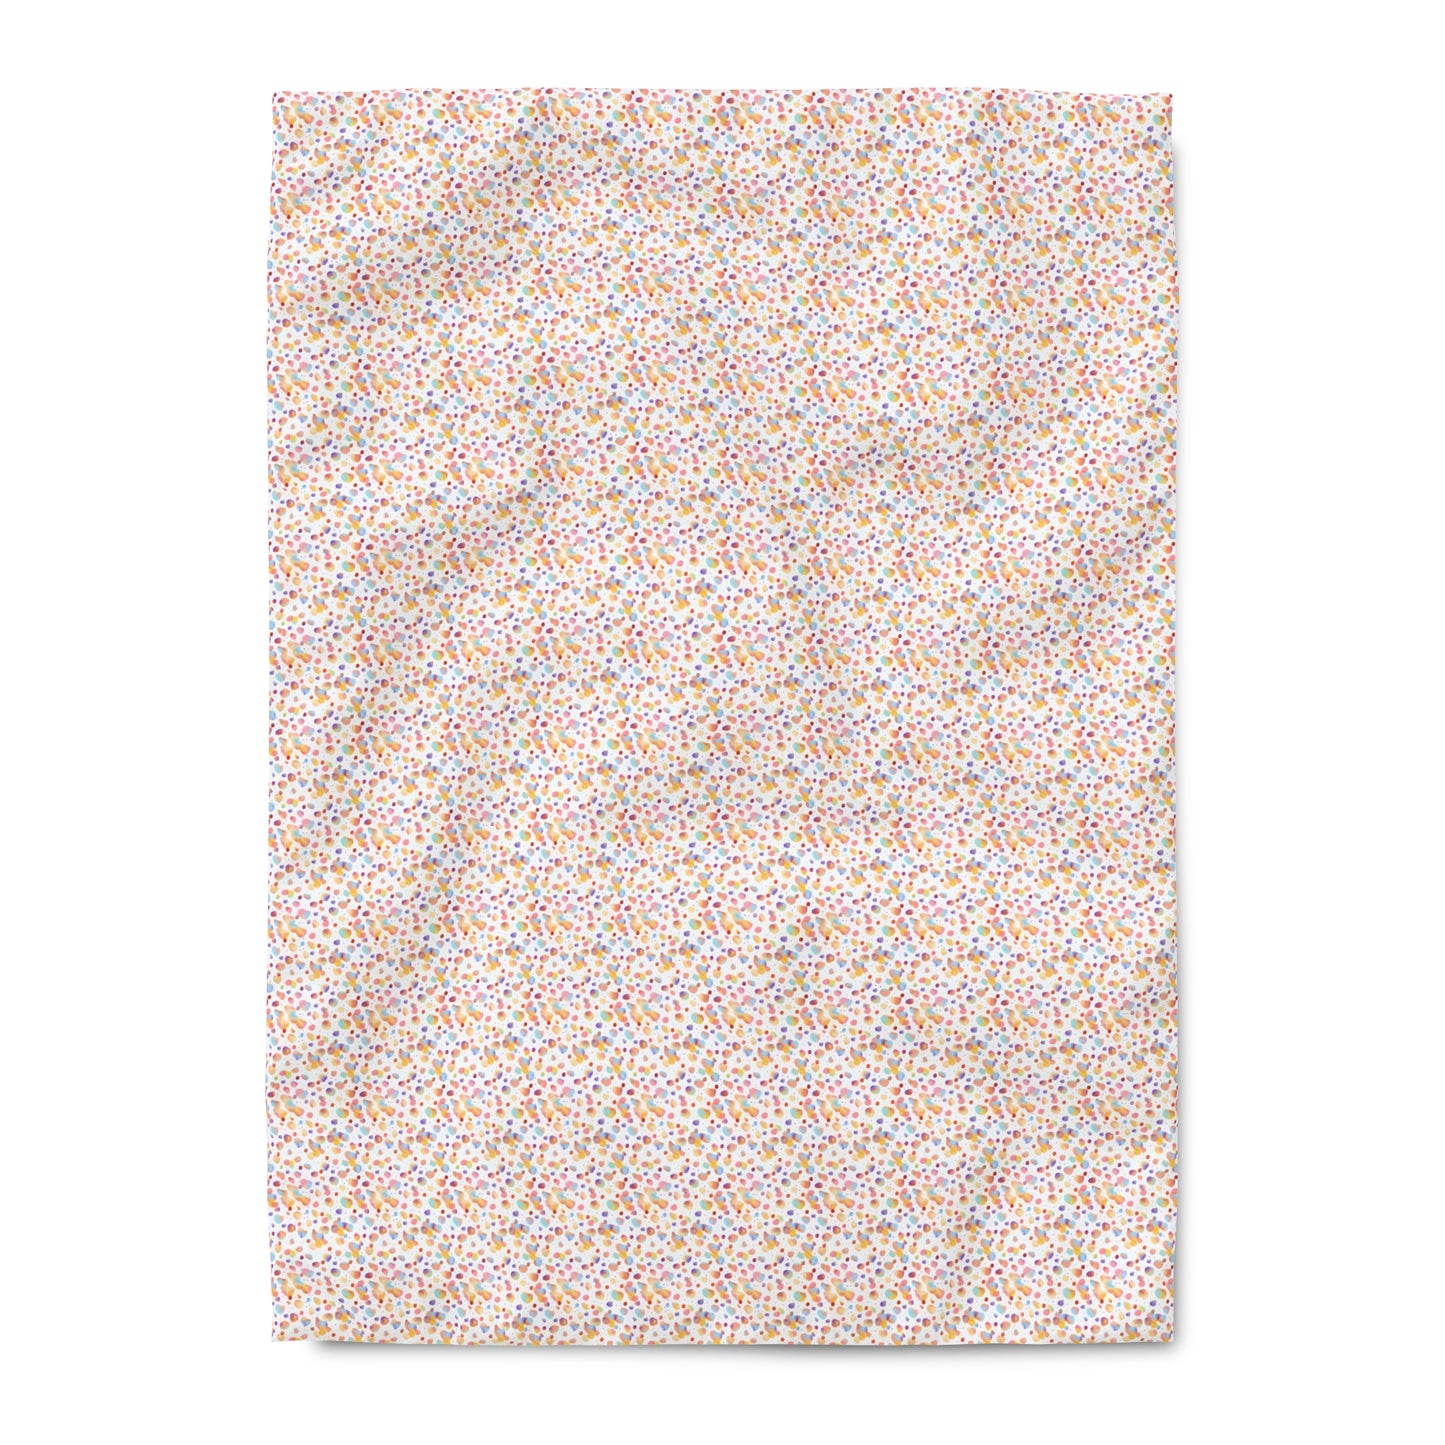 Niccie's Pastel Abstract Pattern Duvet Cover Bedding for a Stylish Bedroom